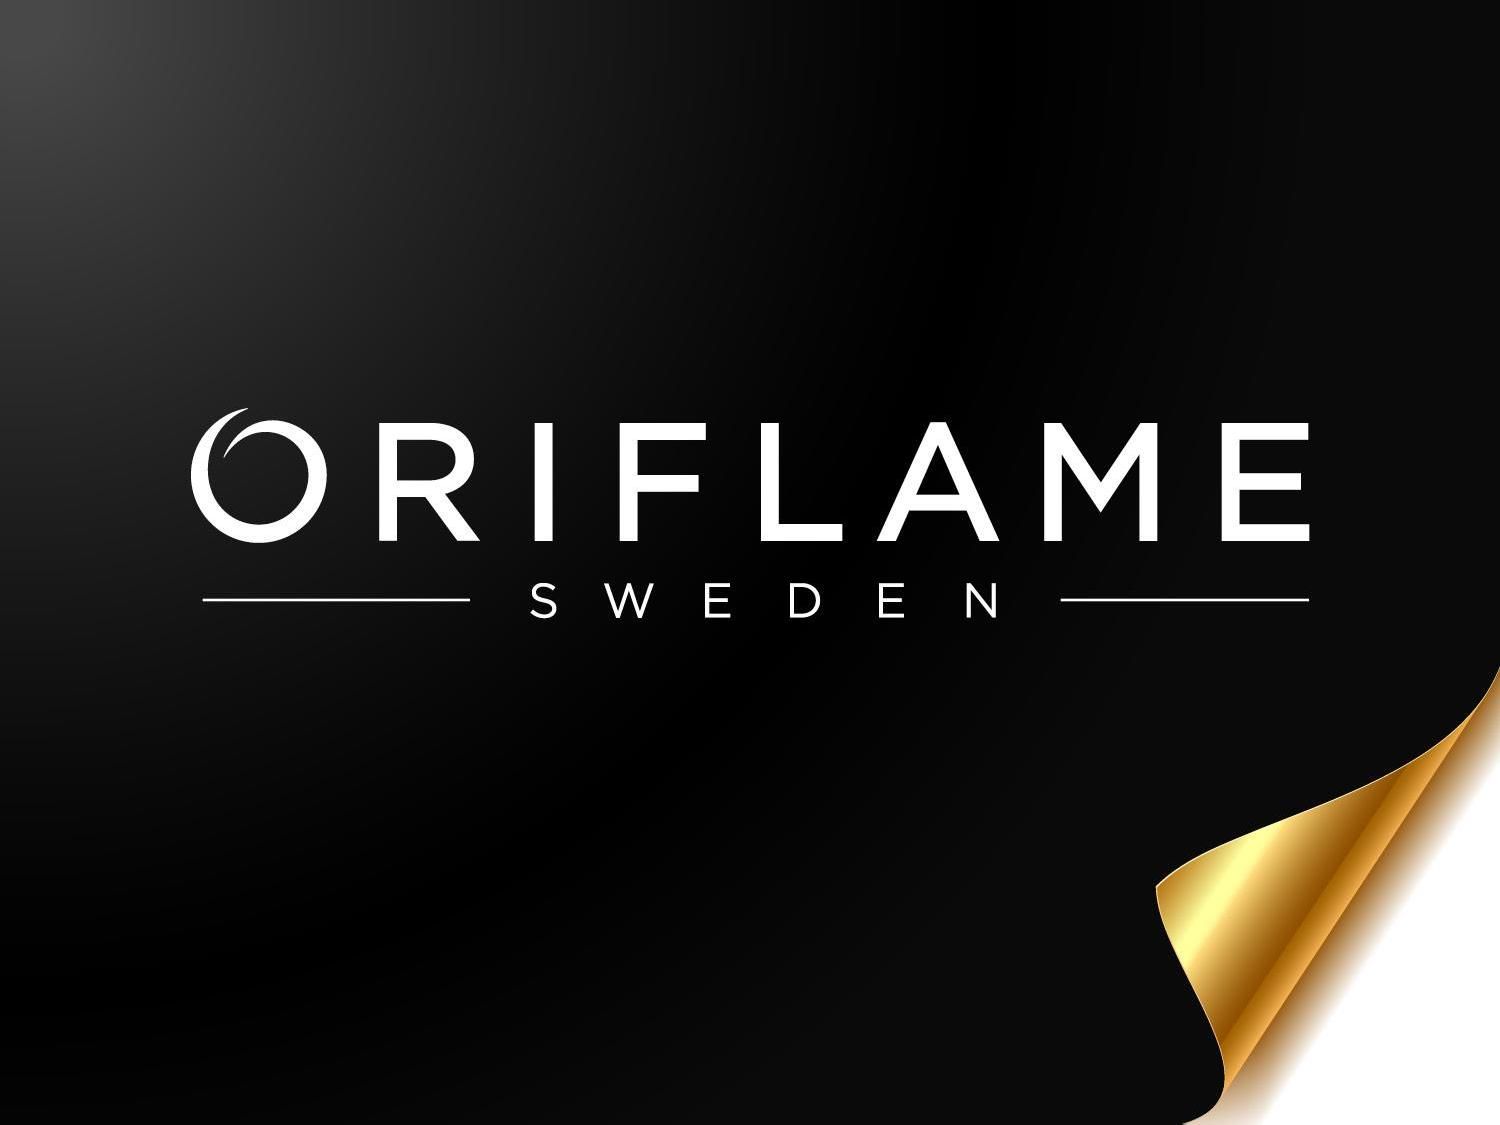 Hackers hacked into Oriflame website and put the passport details of 1.3 million customers up for sale